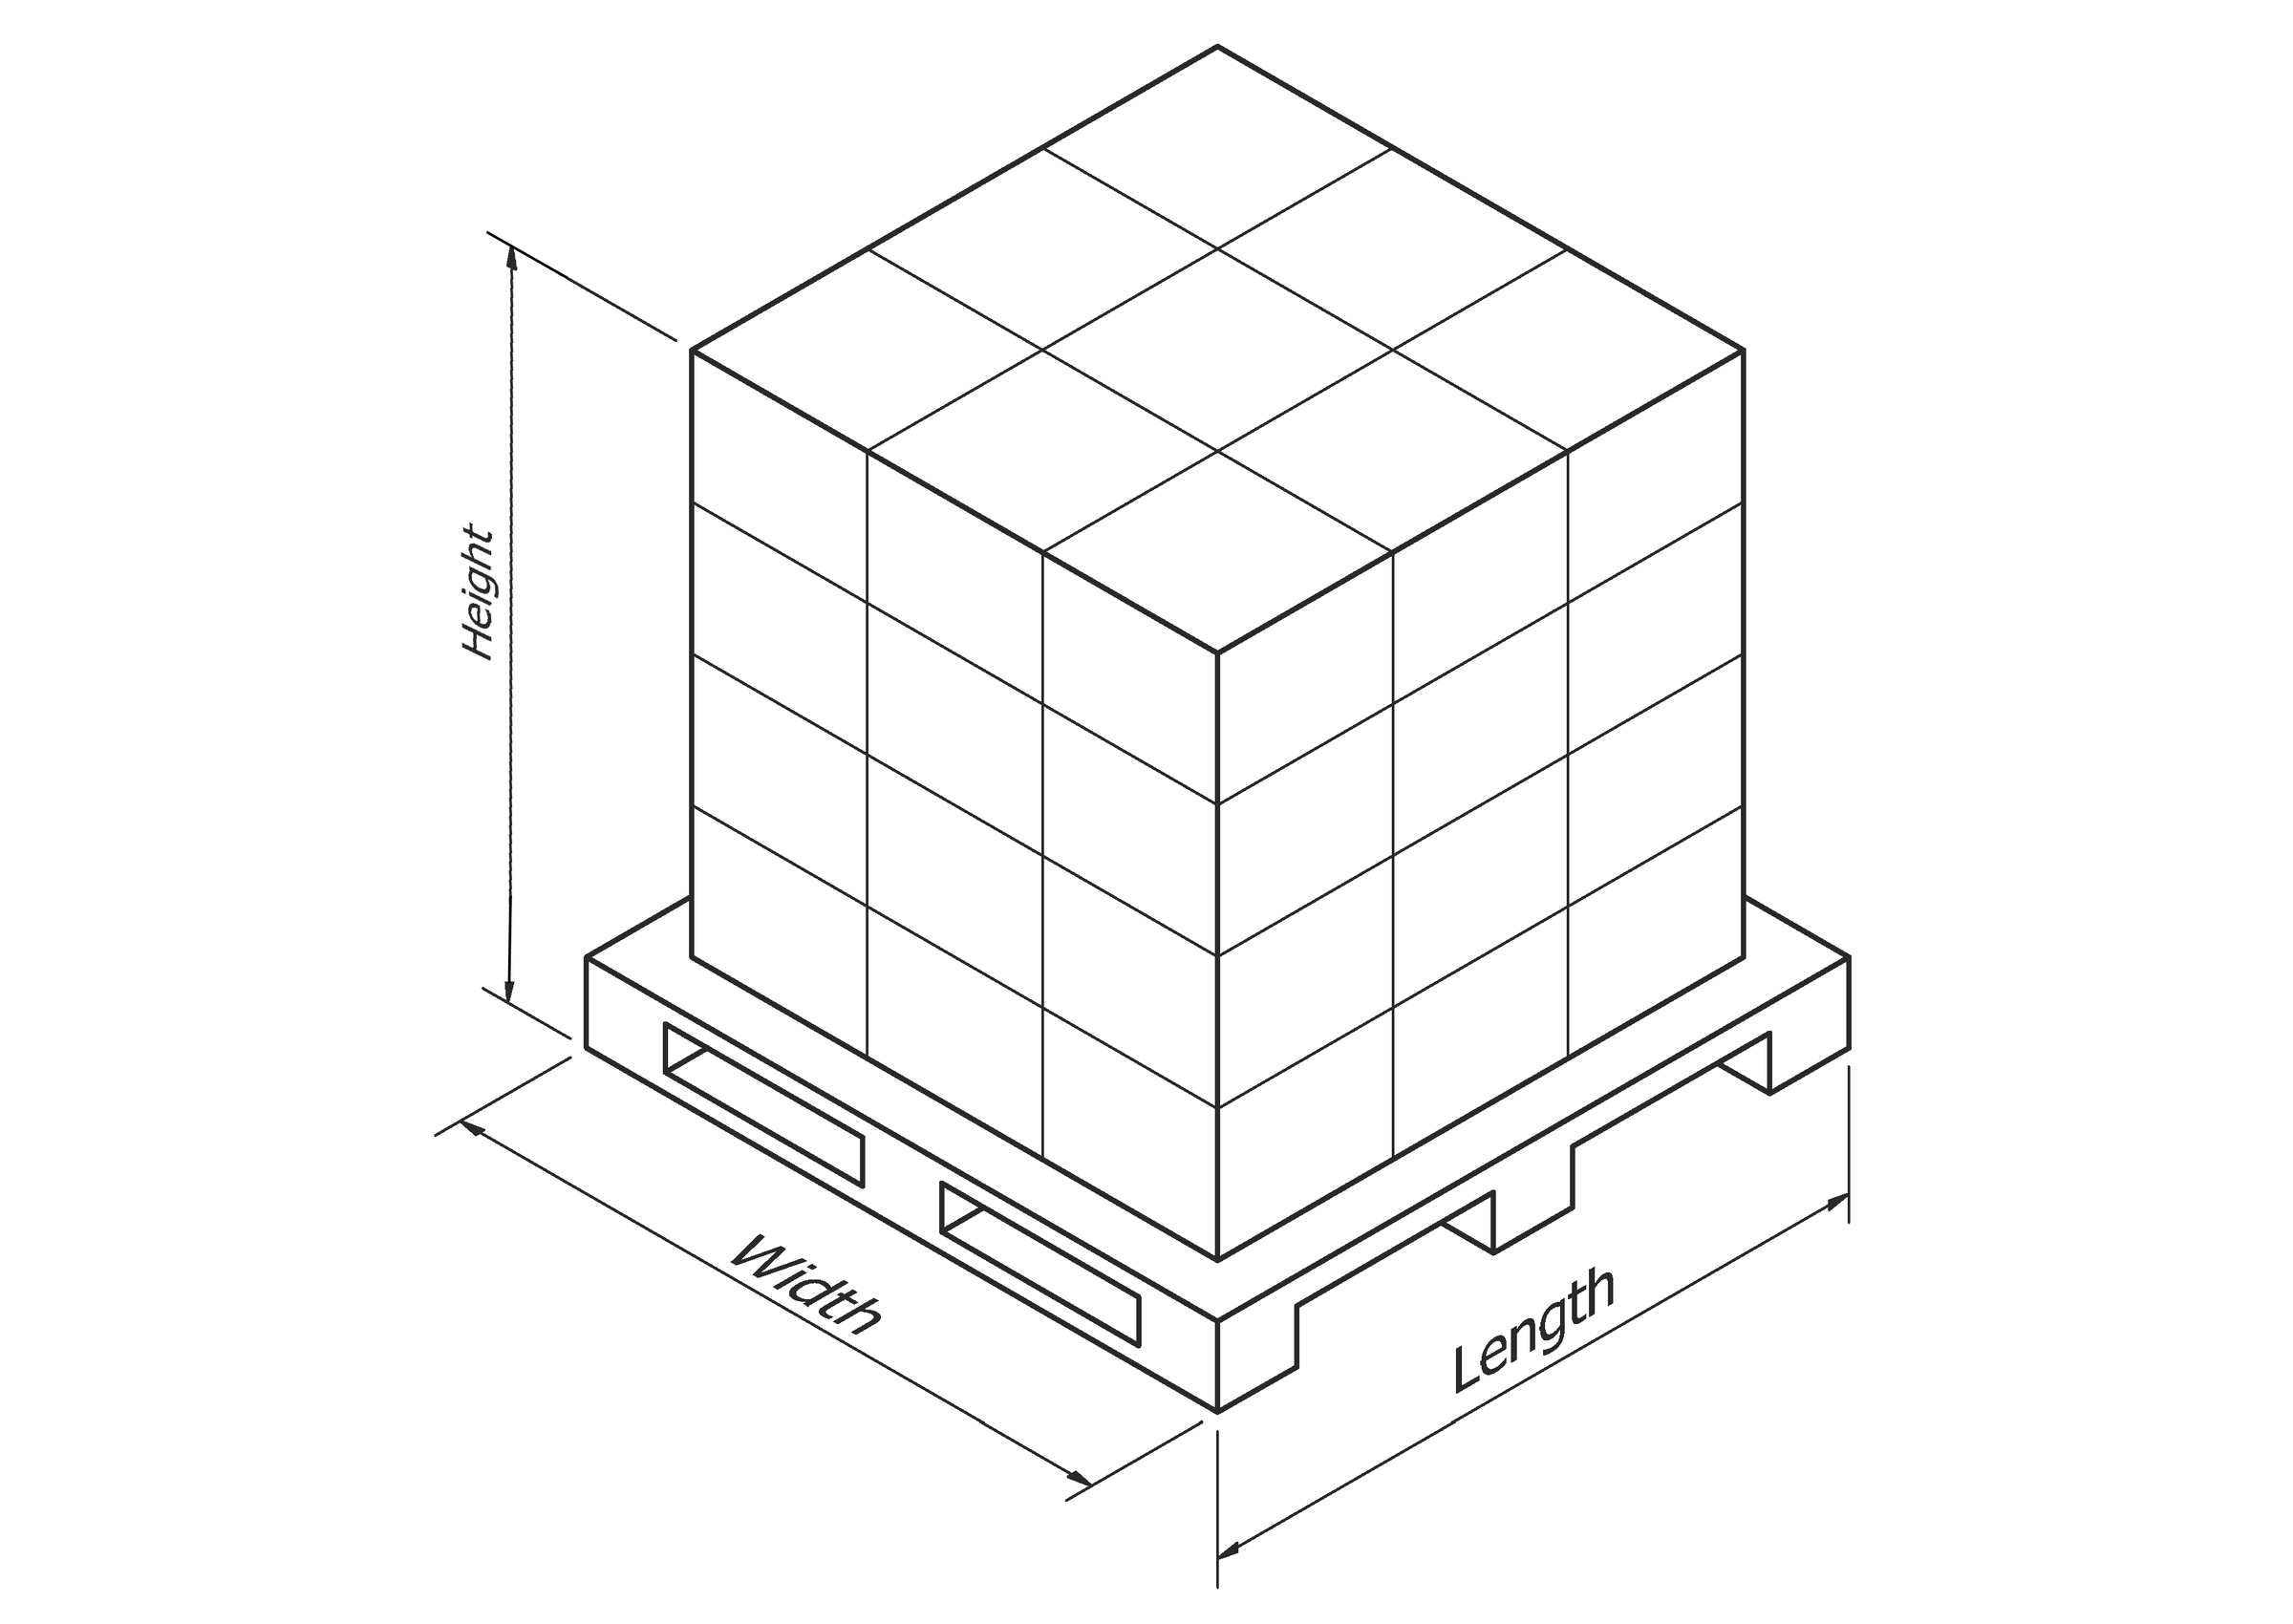 Dimensions of Cartons on Pallet for FOB shipping cost estimate.